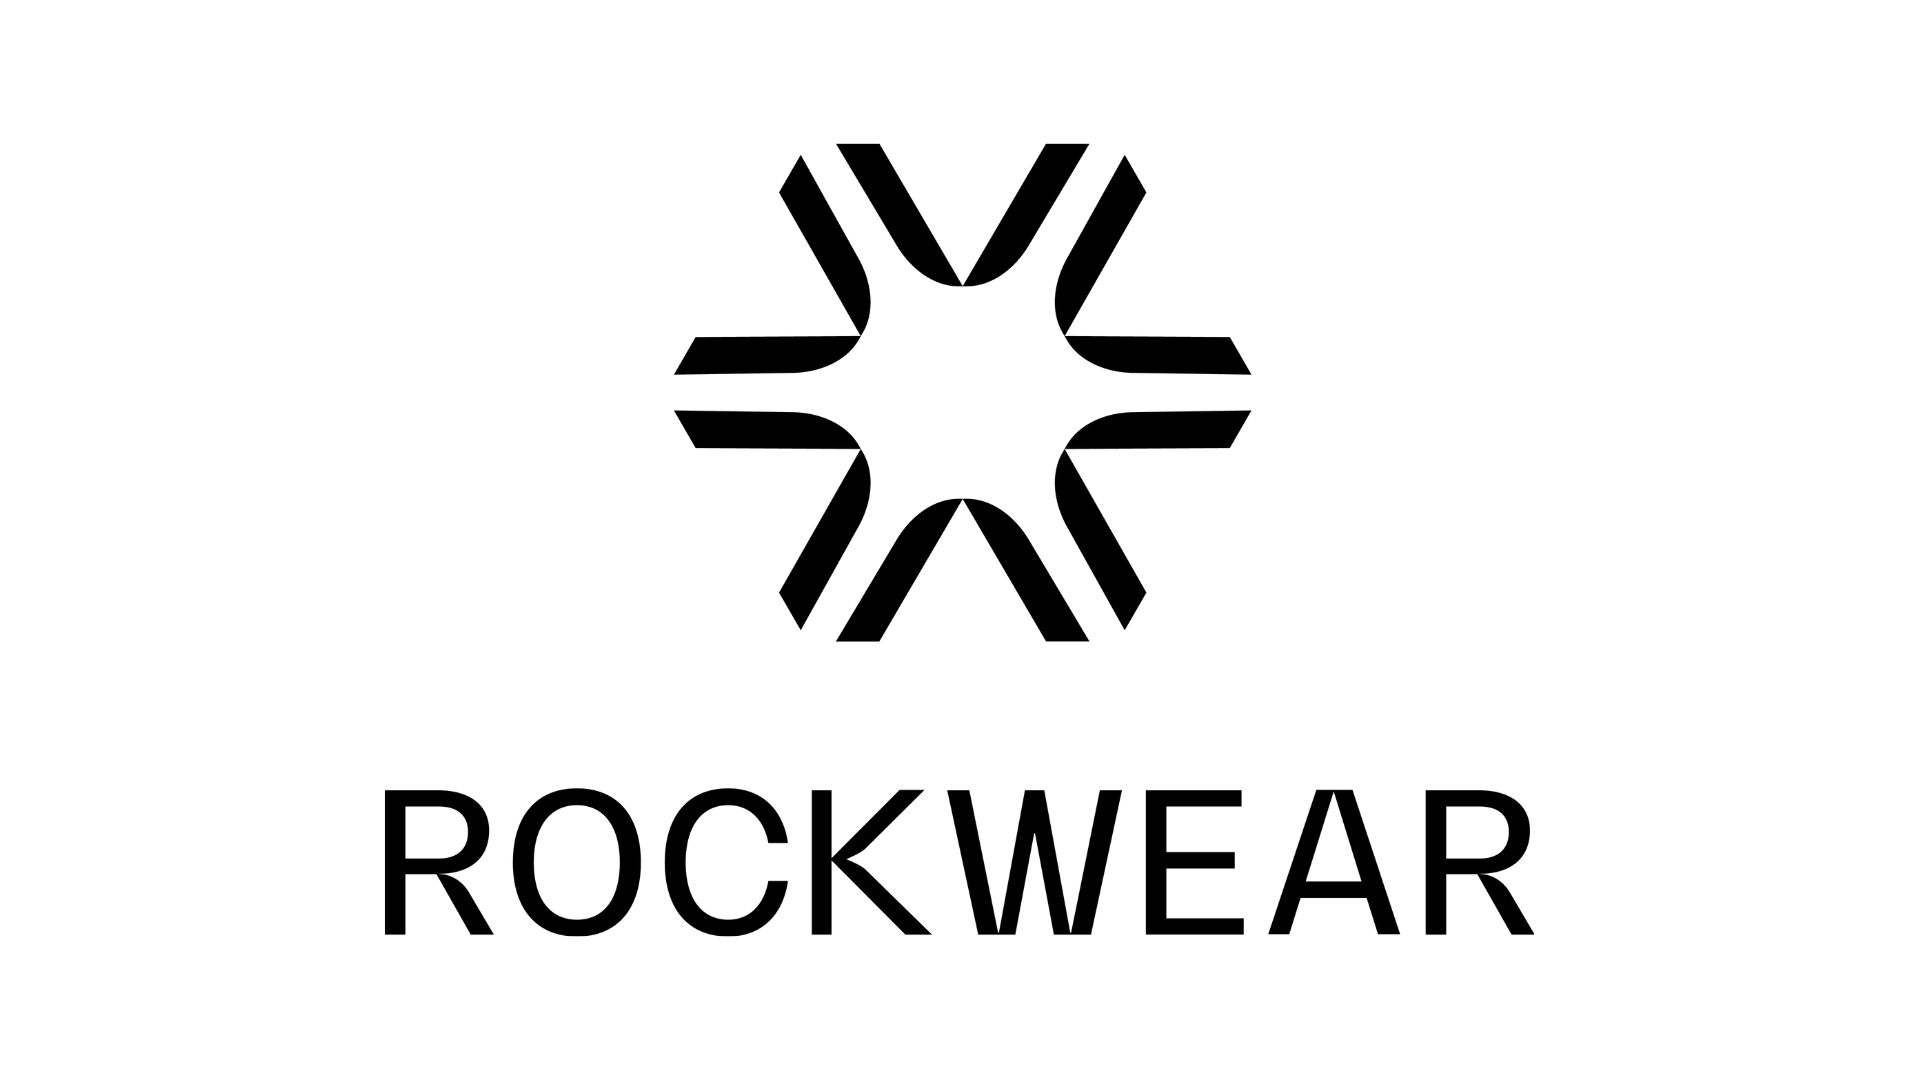 https://www.willowsshoppingcentre.com.au/-/media/retail-sites/willows/images/logo/stores/rockwear-new-logo-oct-2023.jpg?h=1080&w=1920&hash=ADFF3E6FA6540BD5A9A208276E239F3C